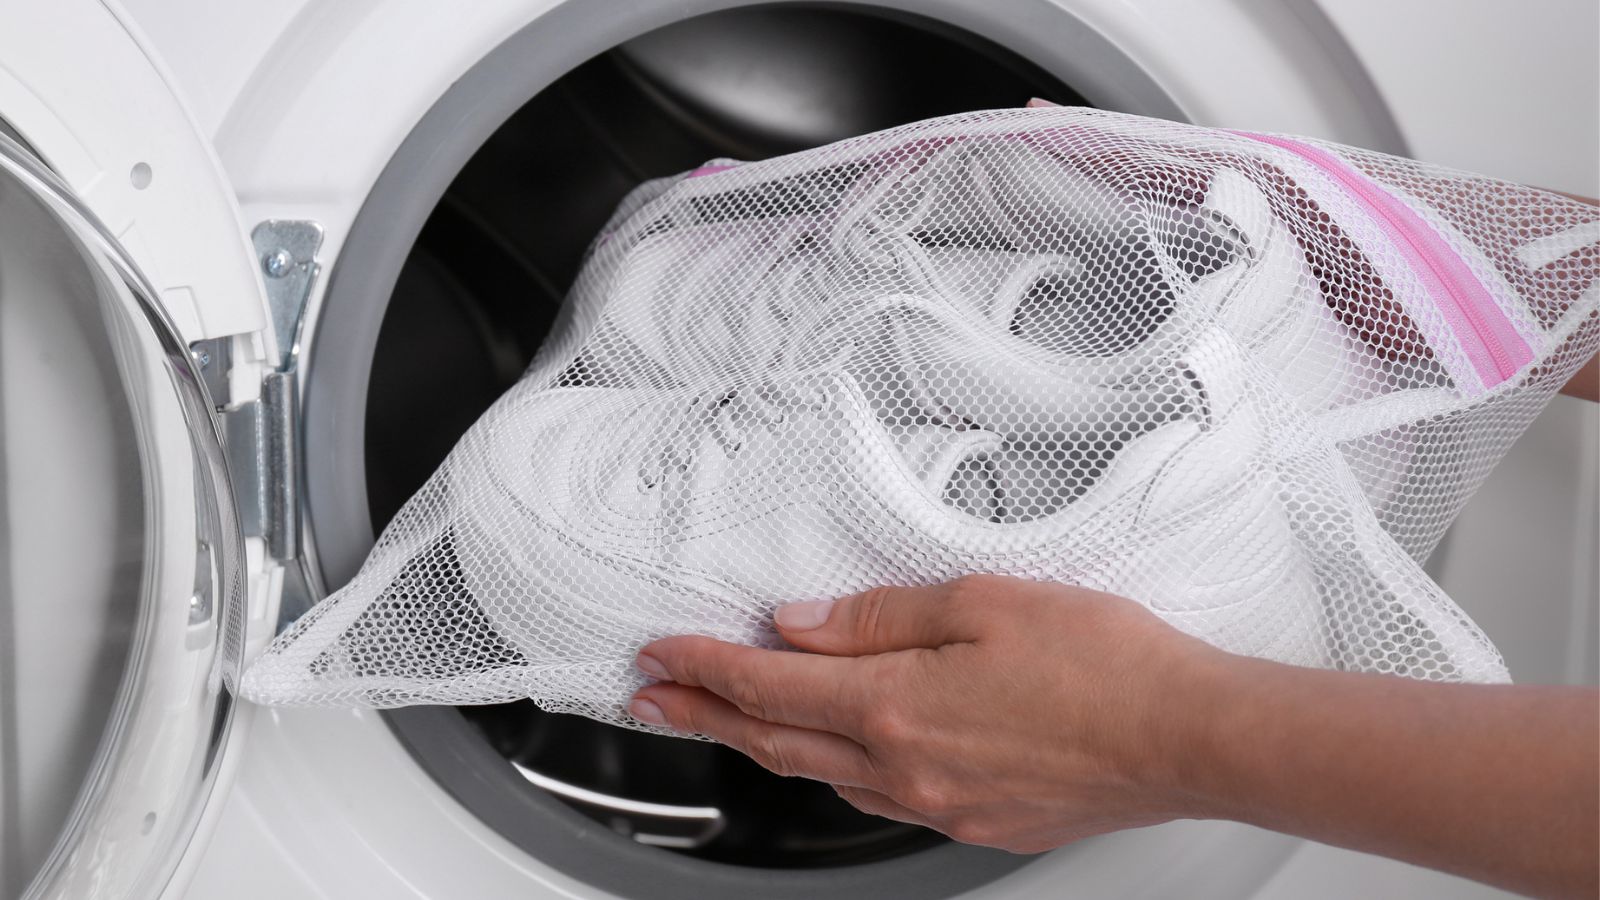 How to dry shoes after washing using a clothes dryer